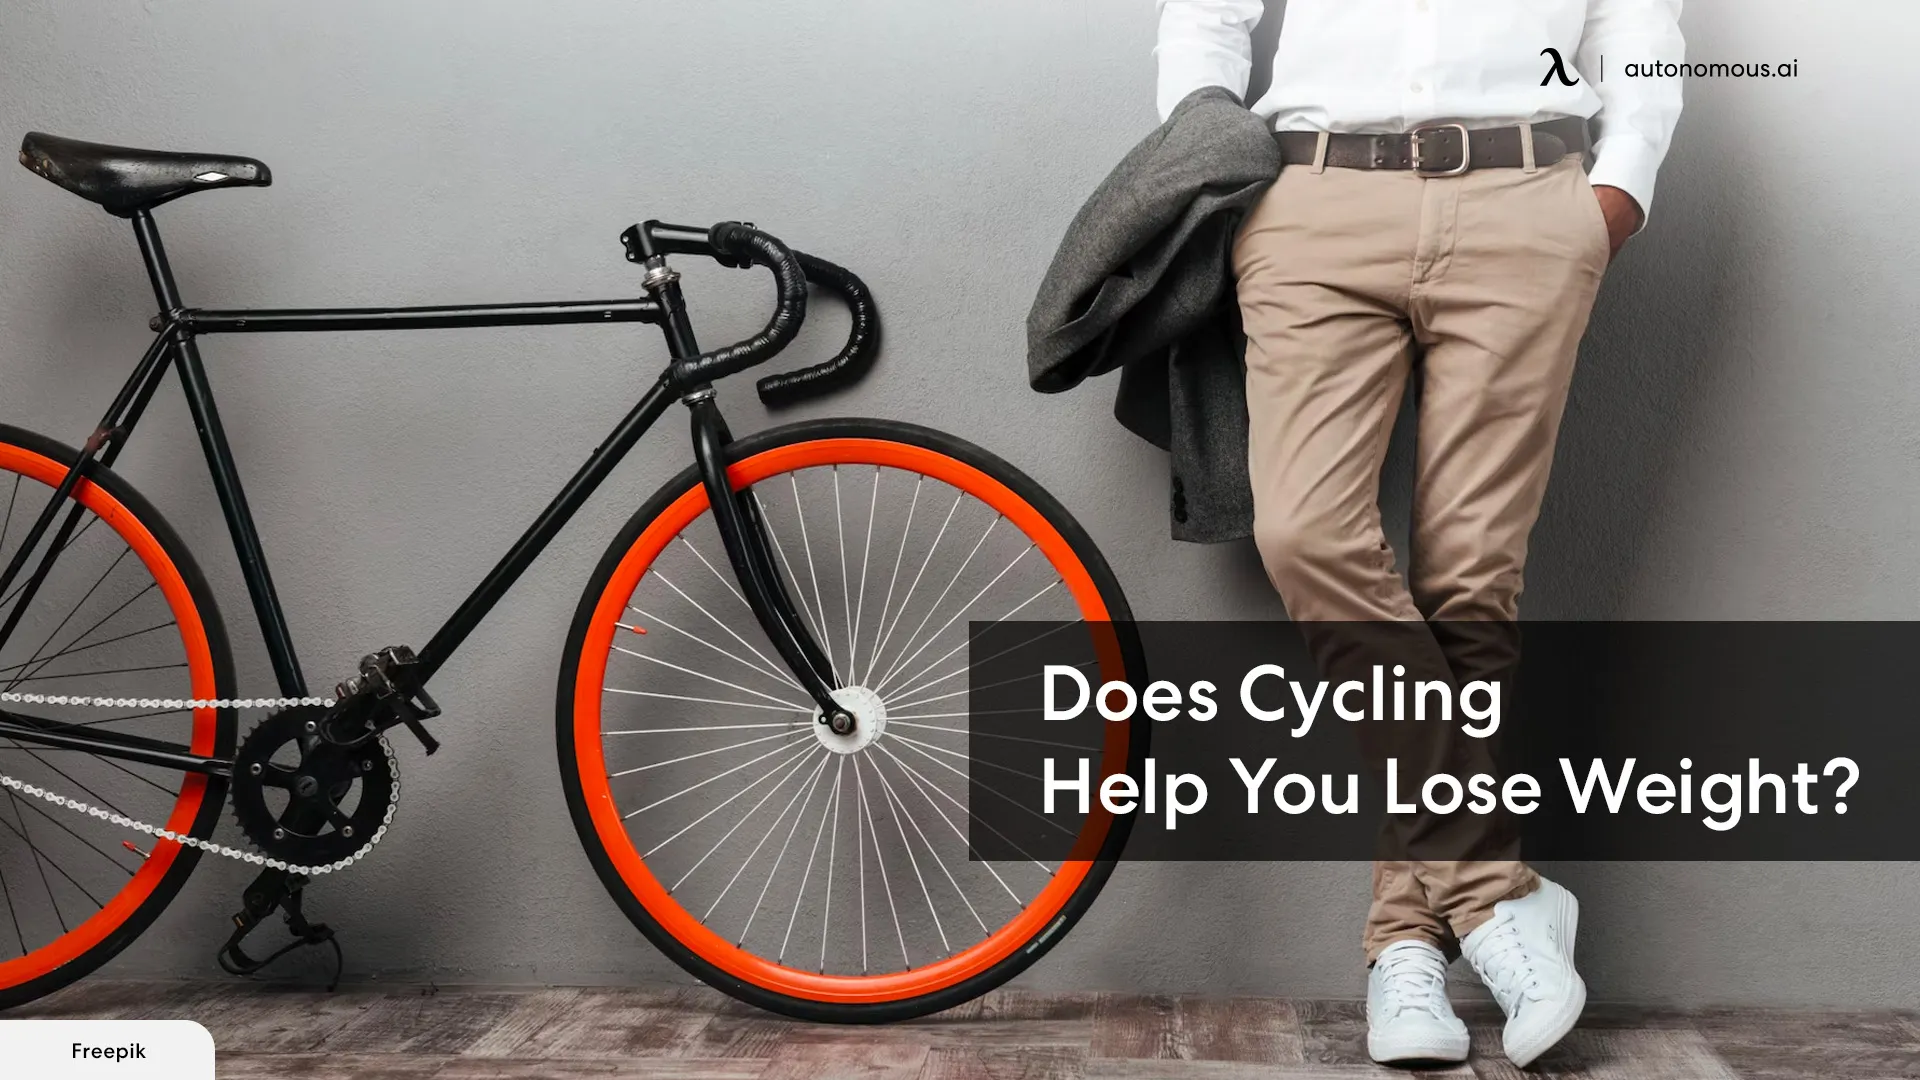 Does Cycling Help You Lose Weight? 7 Important Dos and Don'ts